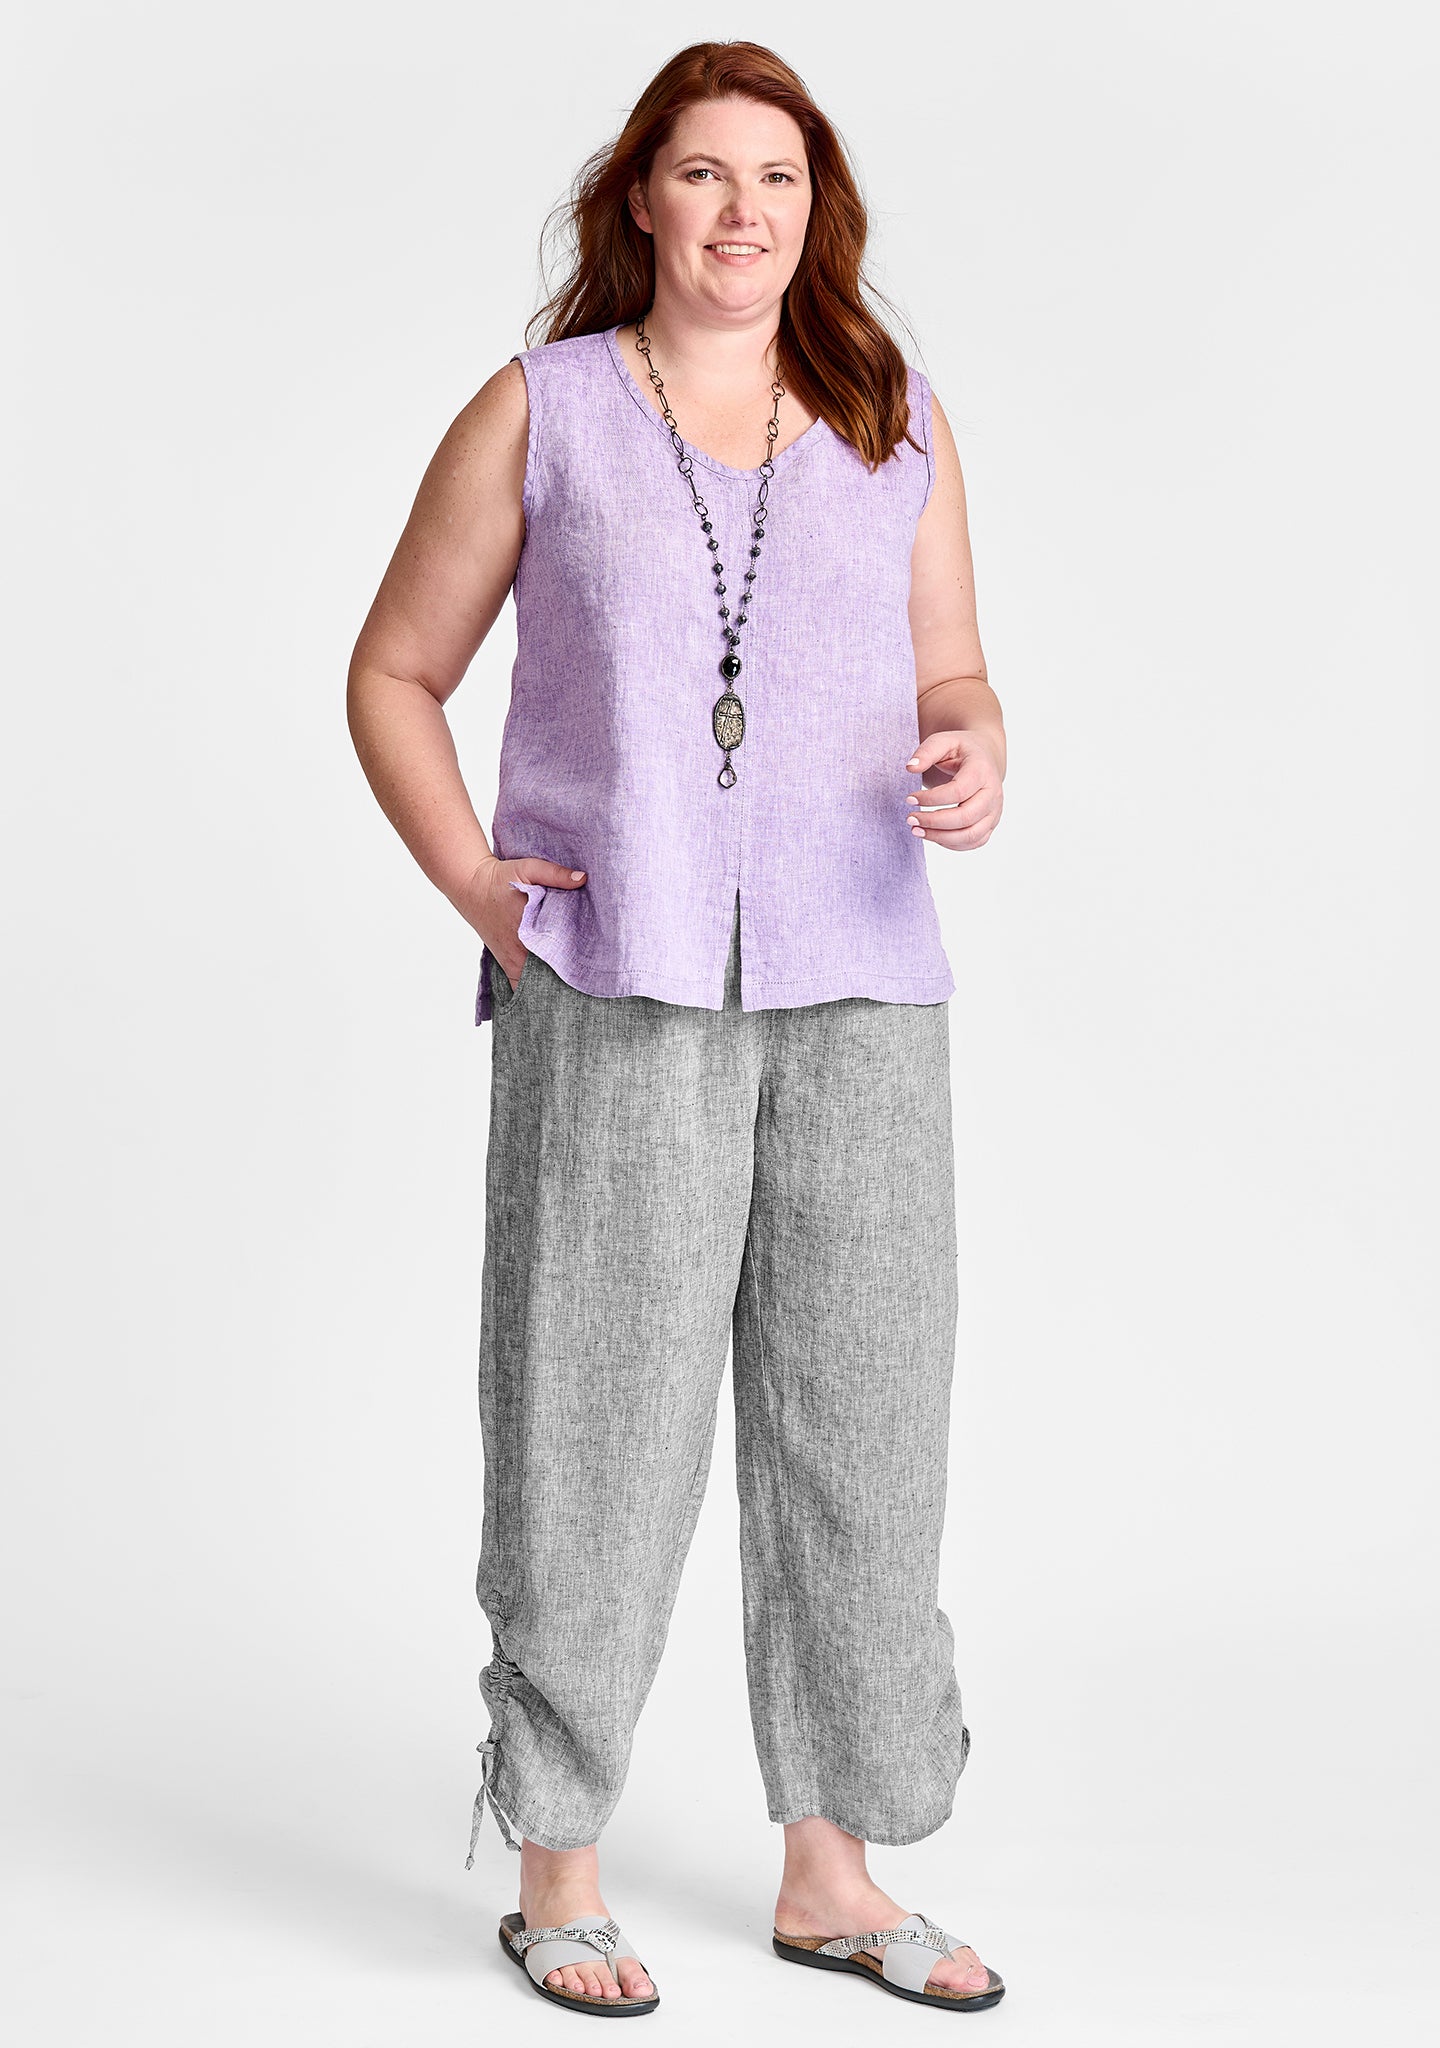 FLAX linen tank in purple with linen pants in grey